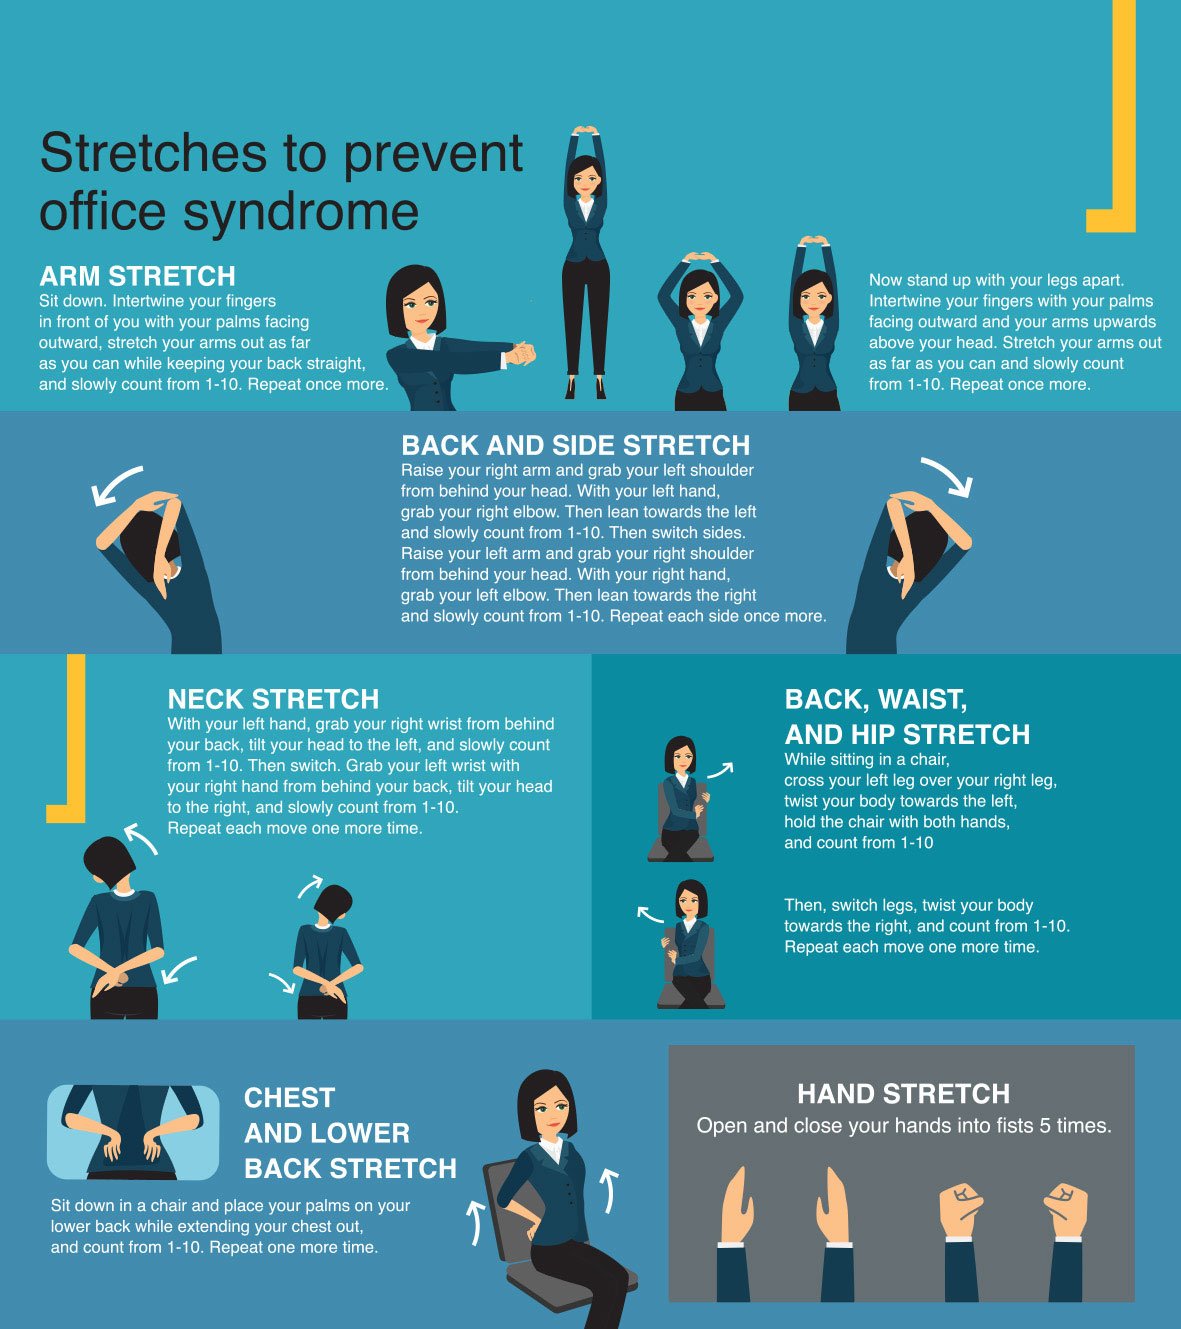 Stretches to prevent office syndrome | Bumrungrad